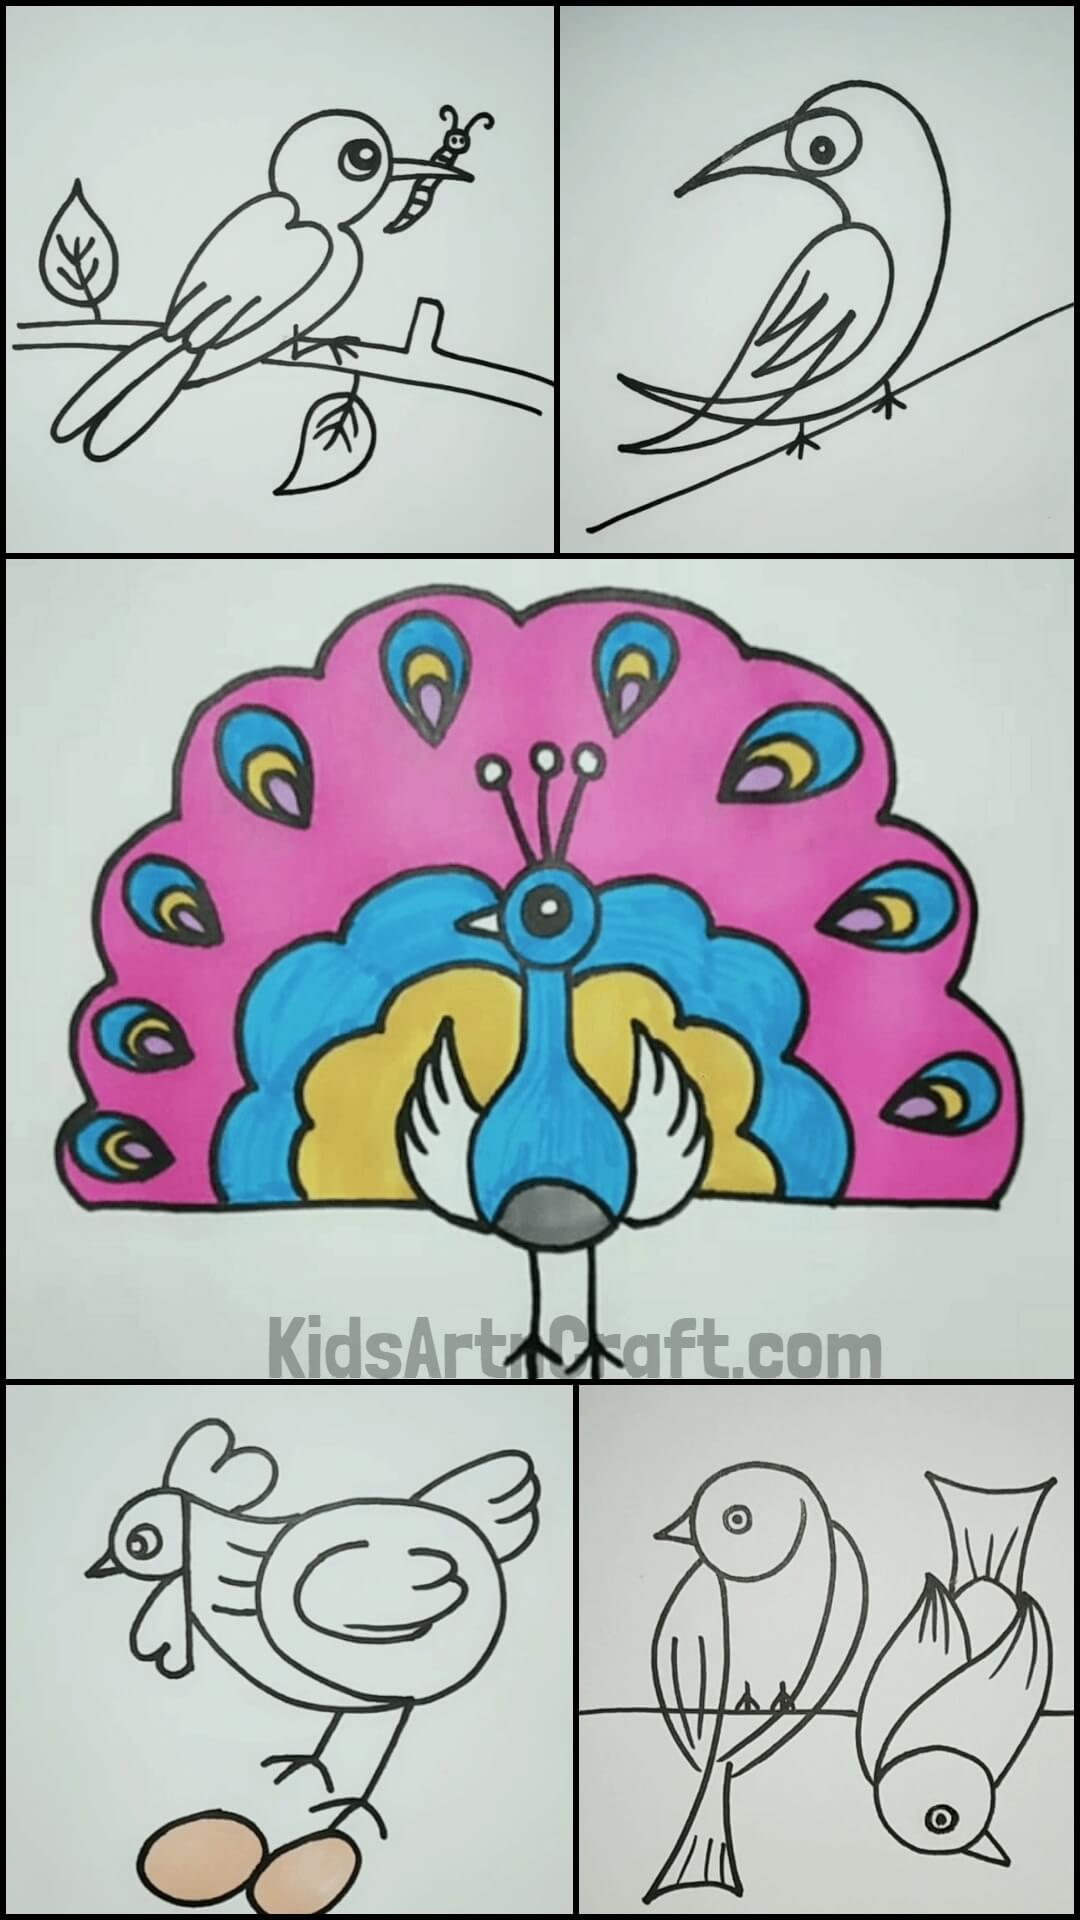 Drawing Ideas for Kids - Birds & Other Animals